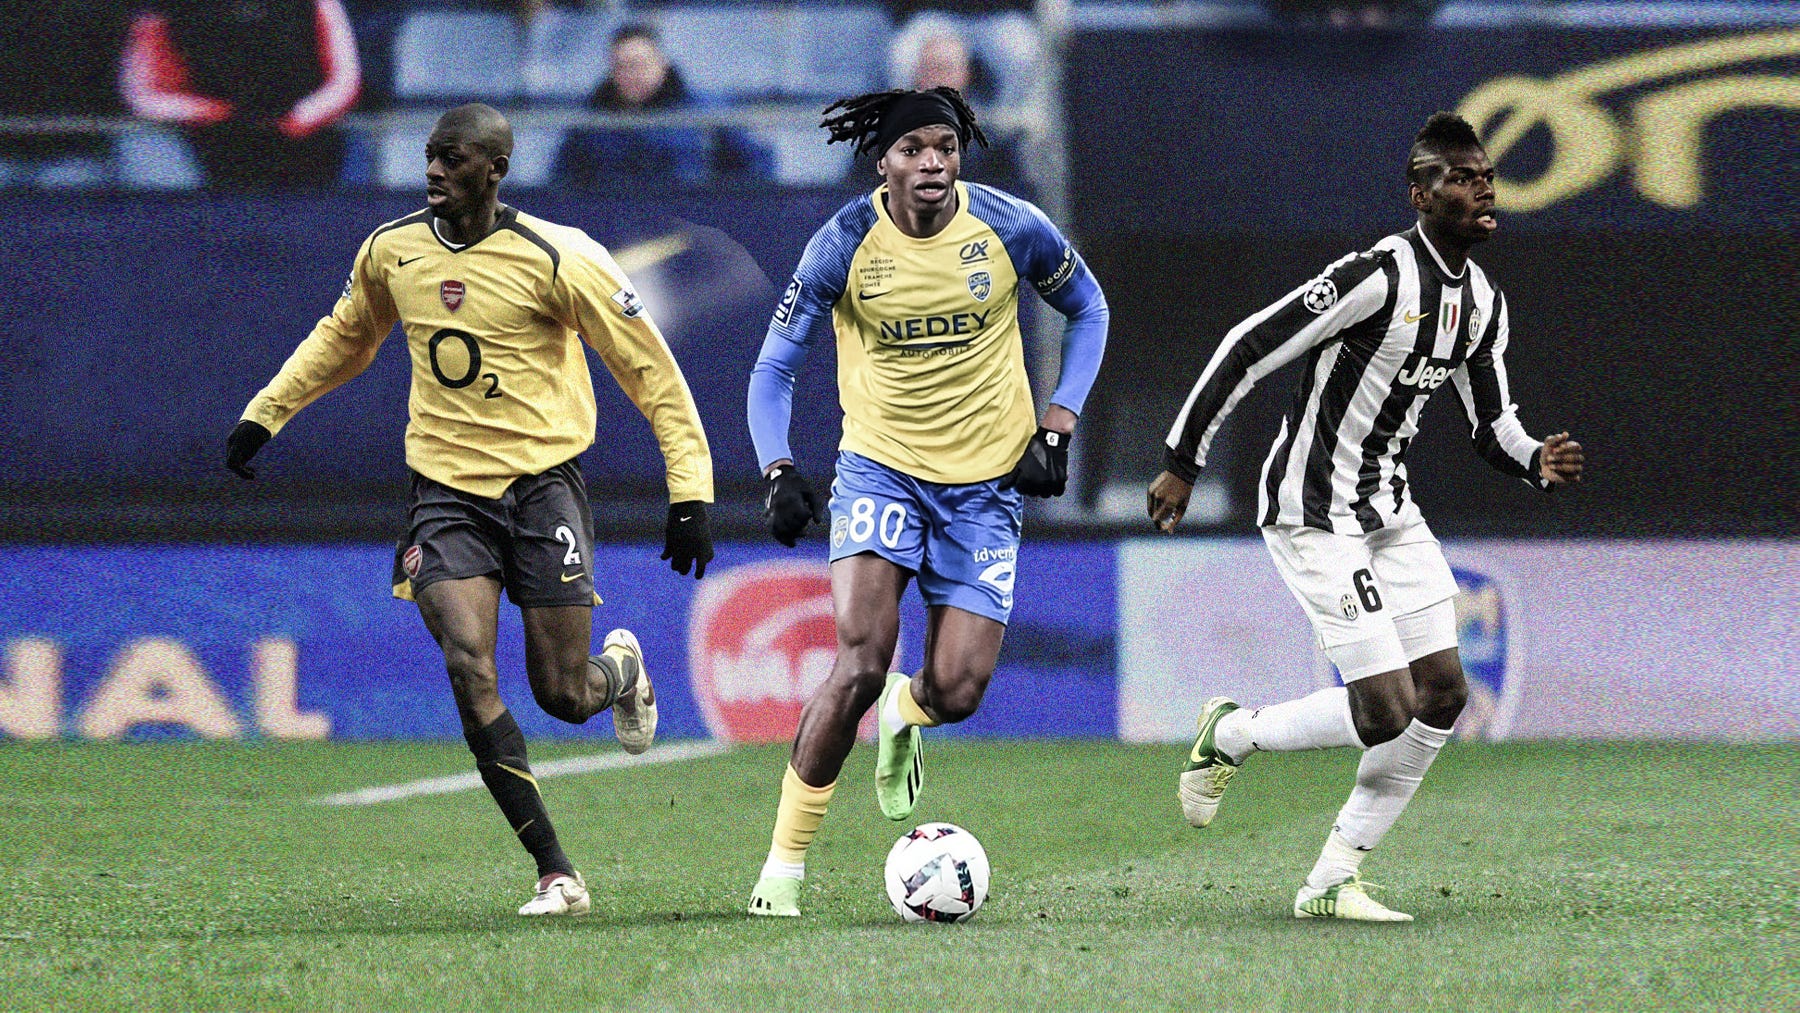 An edited photo featuring Skelly Alvero in a Sochaux shirt in the middle, flanked by Abou Diaby in a 2005/06 Arsenal shirt (left) and Paul Pogba in a 2011/12 Juventus shirt (right)